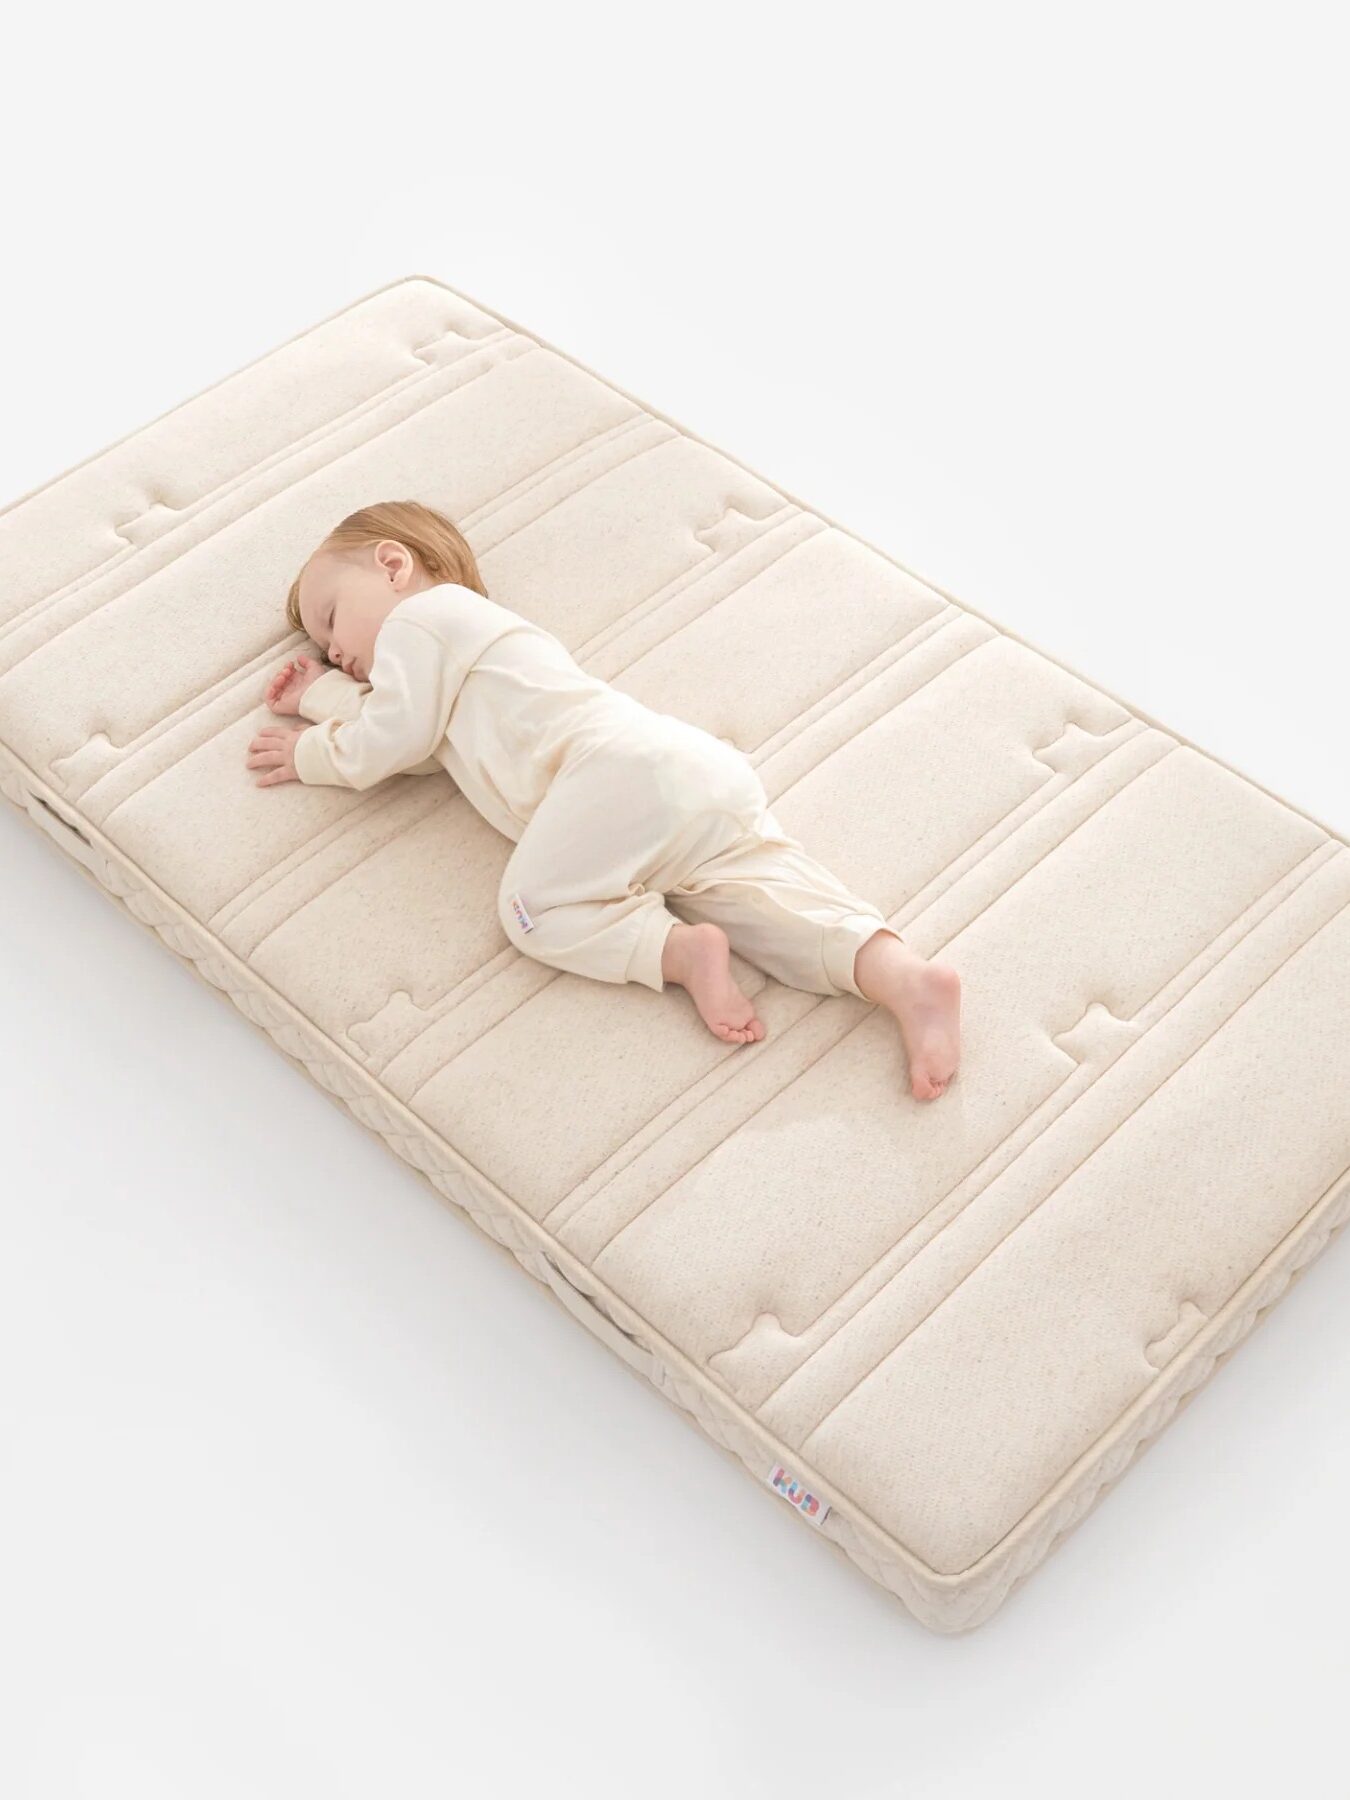 Baby sleeping peacefully on a soft mattress.